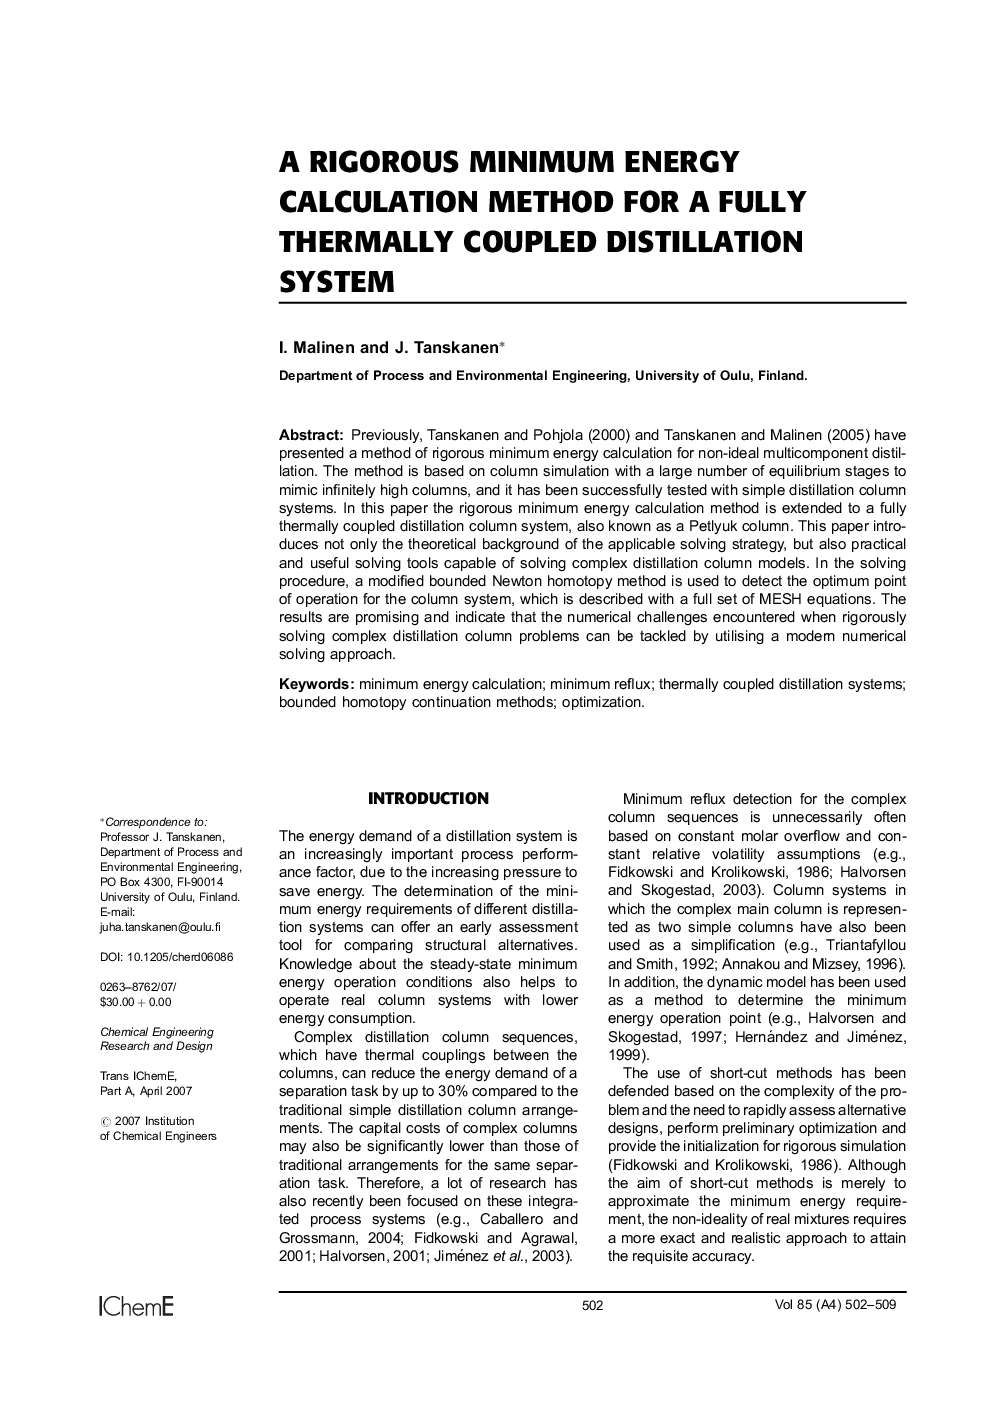 A Rigorous Minimum Energy Calculation Method for a Fully Thermally Coupled Distillation System